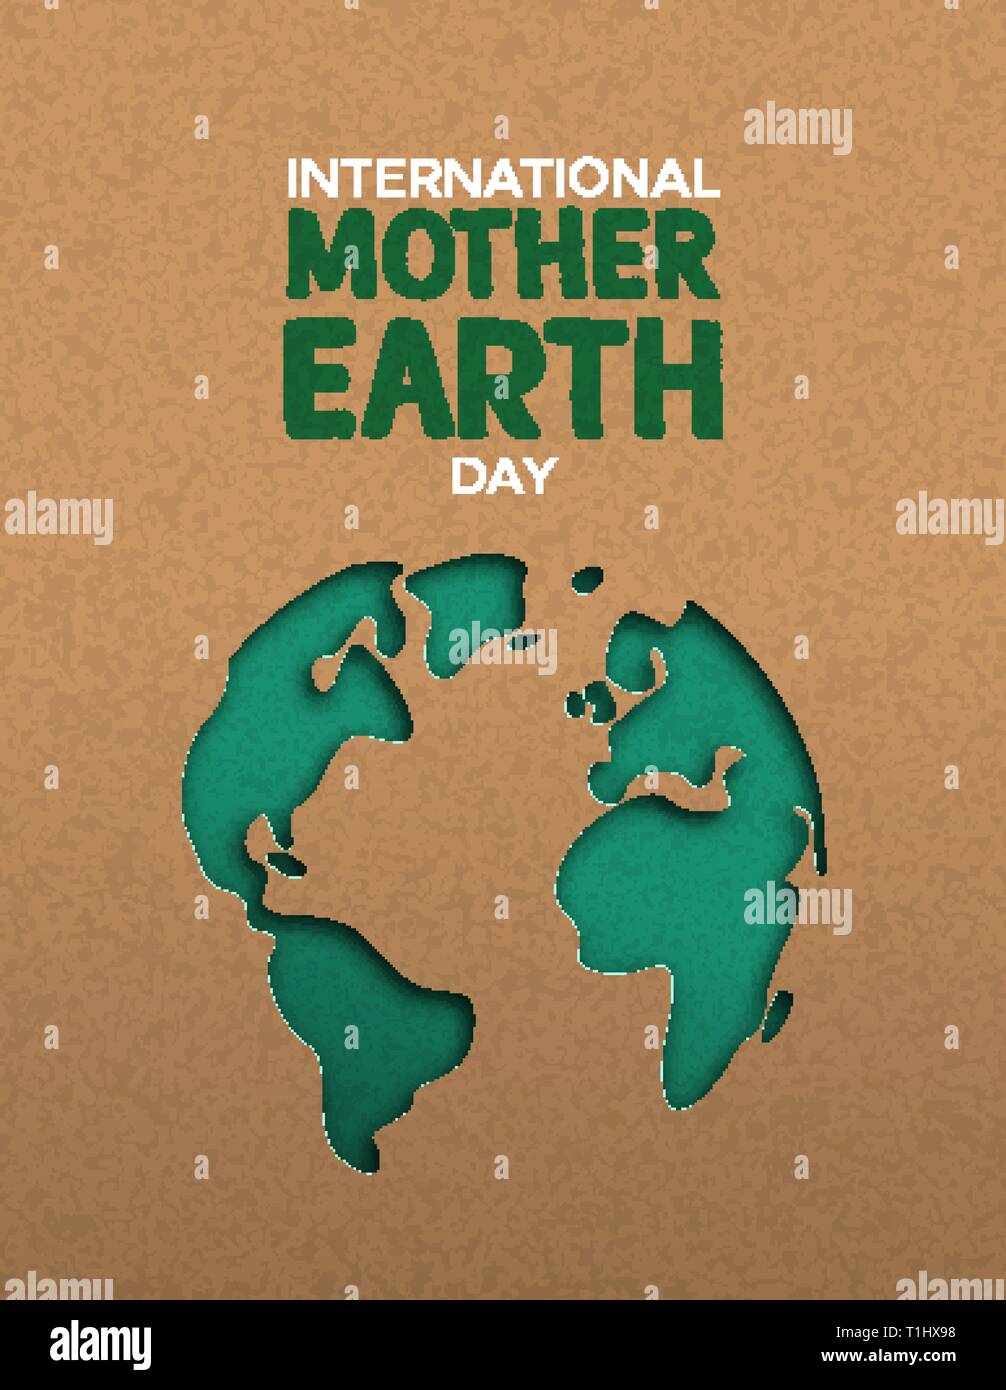 International Mother Earth Day poster illustration of green papercut world map. Recycled paper cutout for planet conservation awareness. Stock Vector